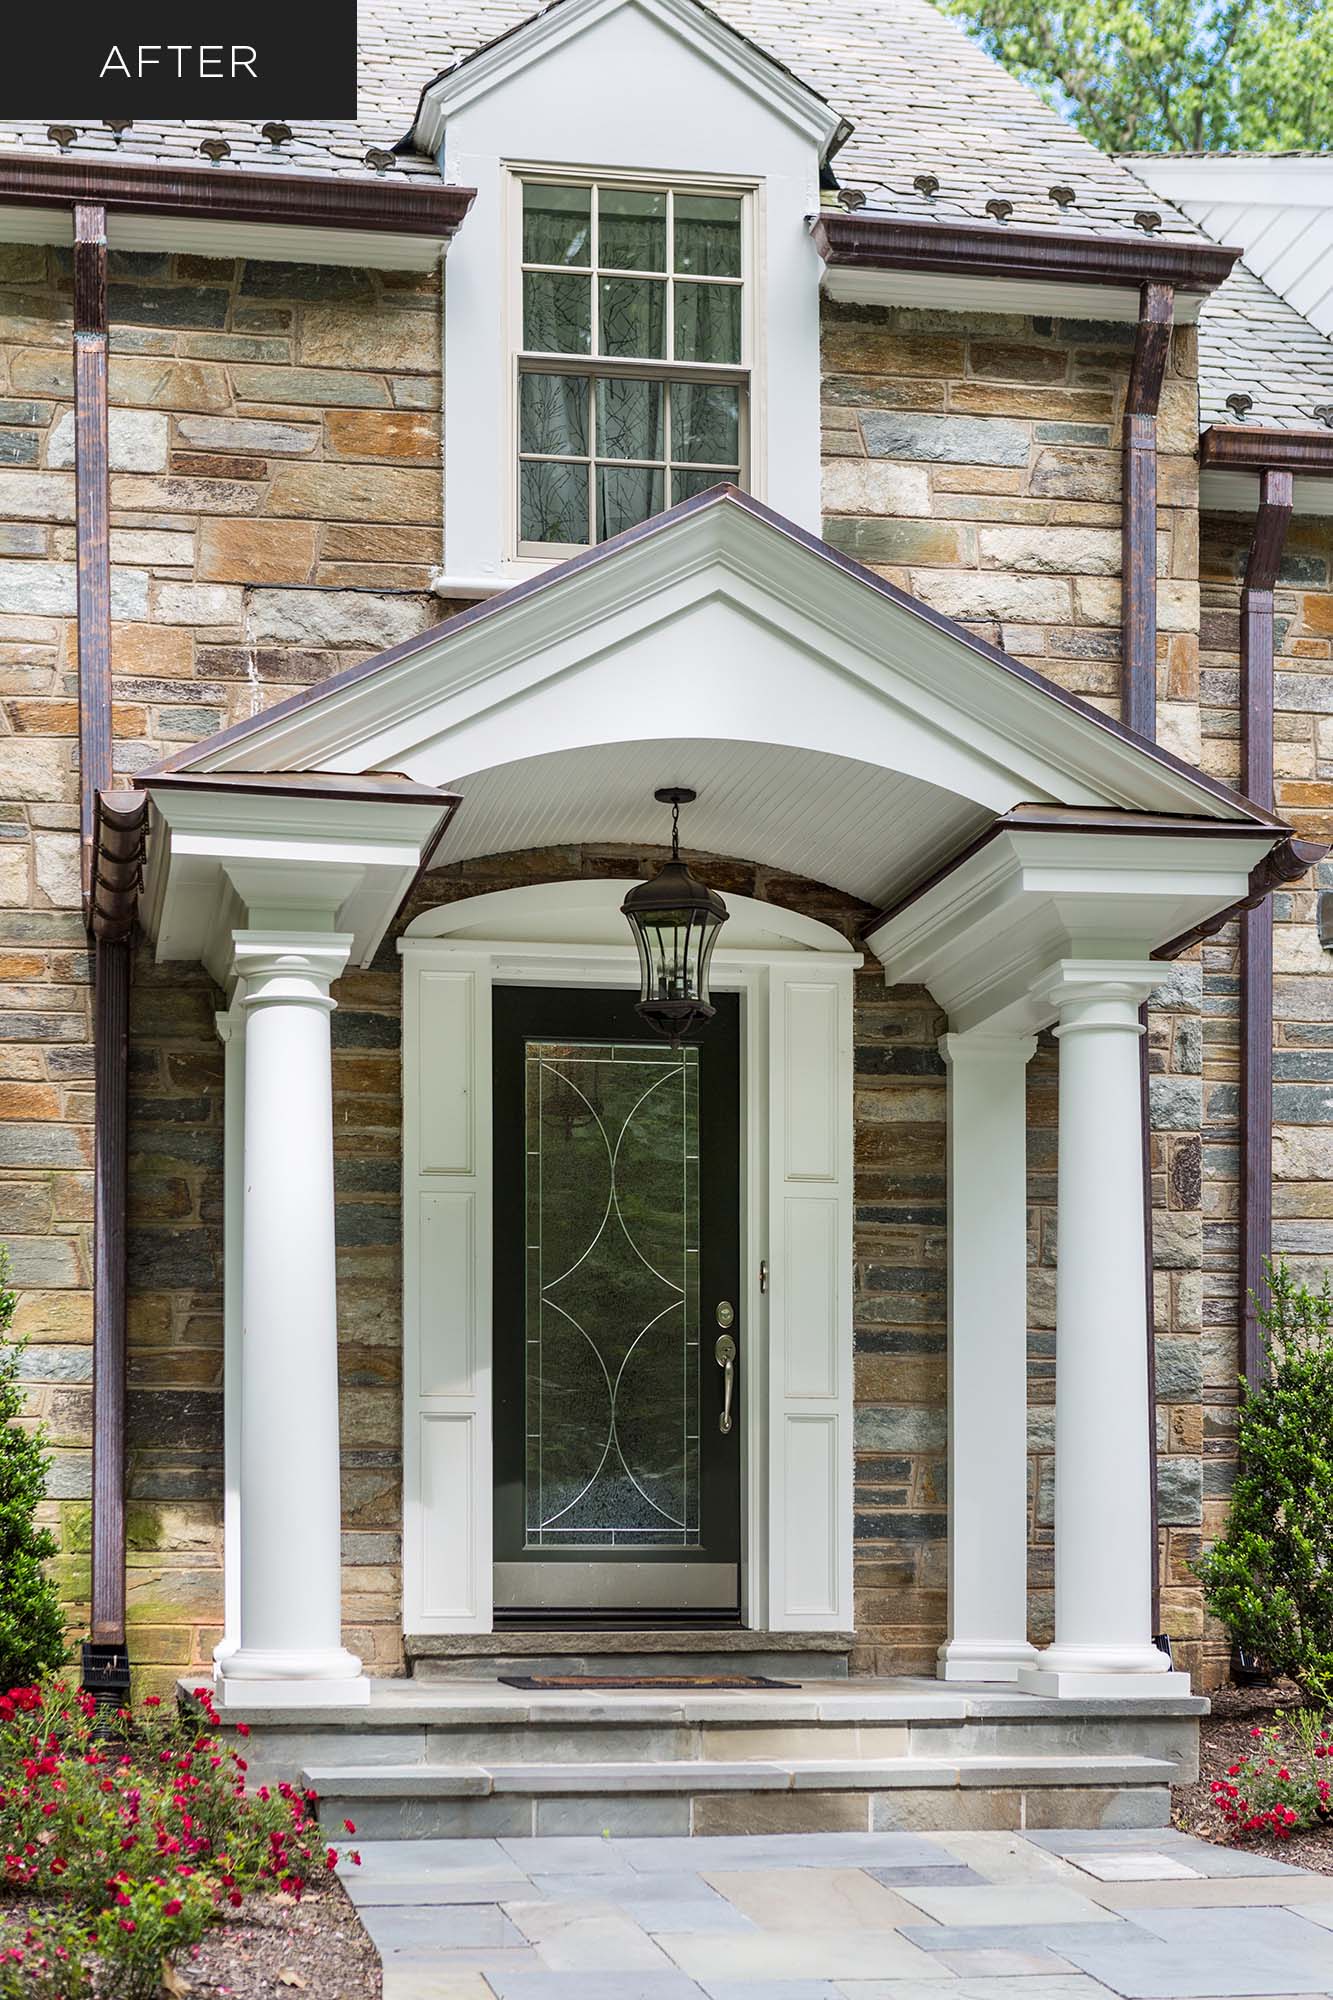 Elegant home portico with columns and leaded-glass door